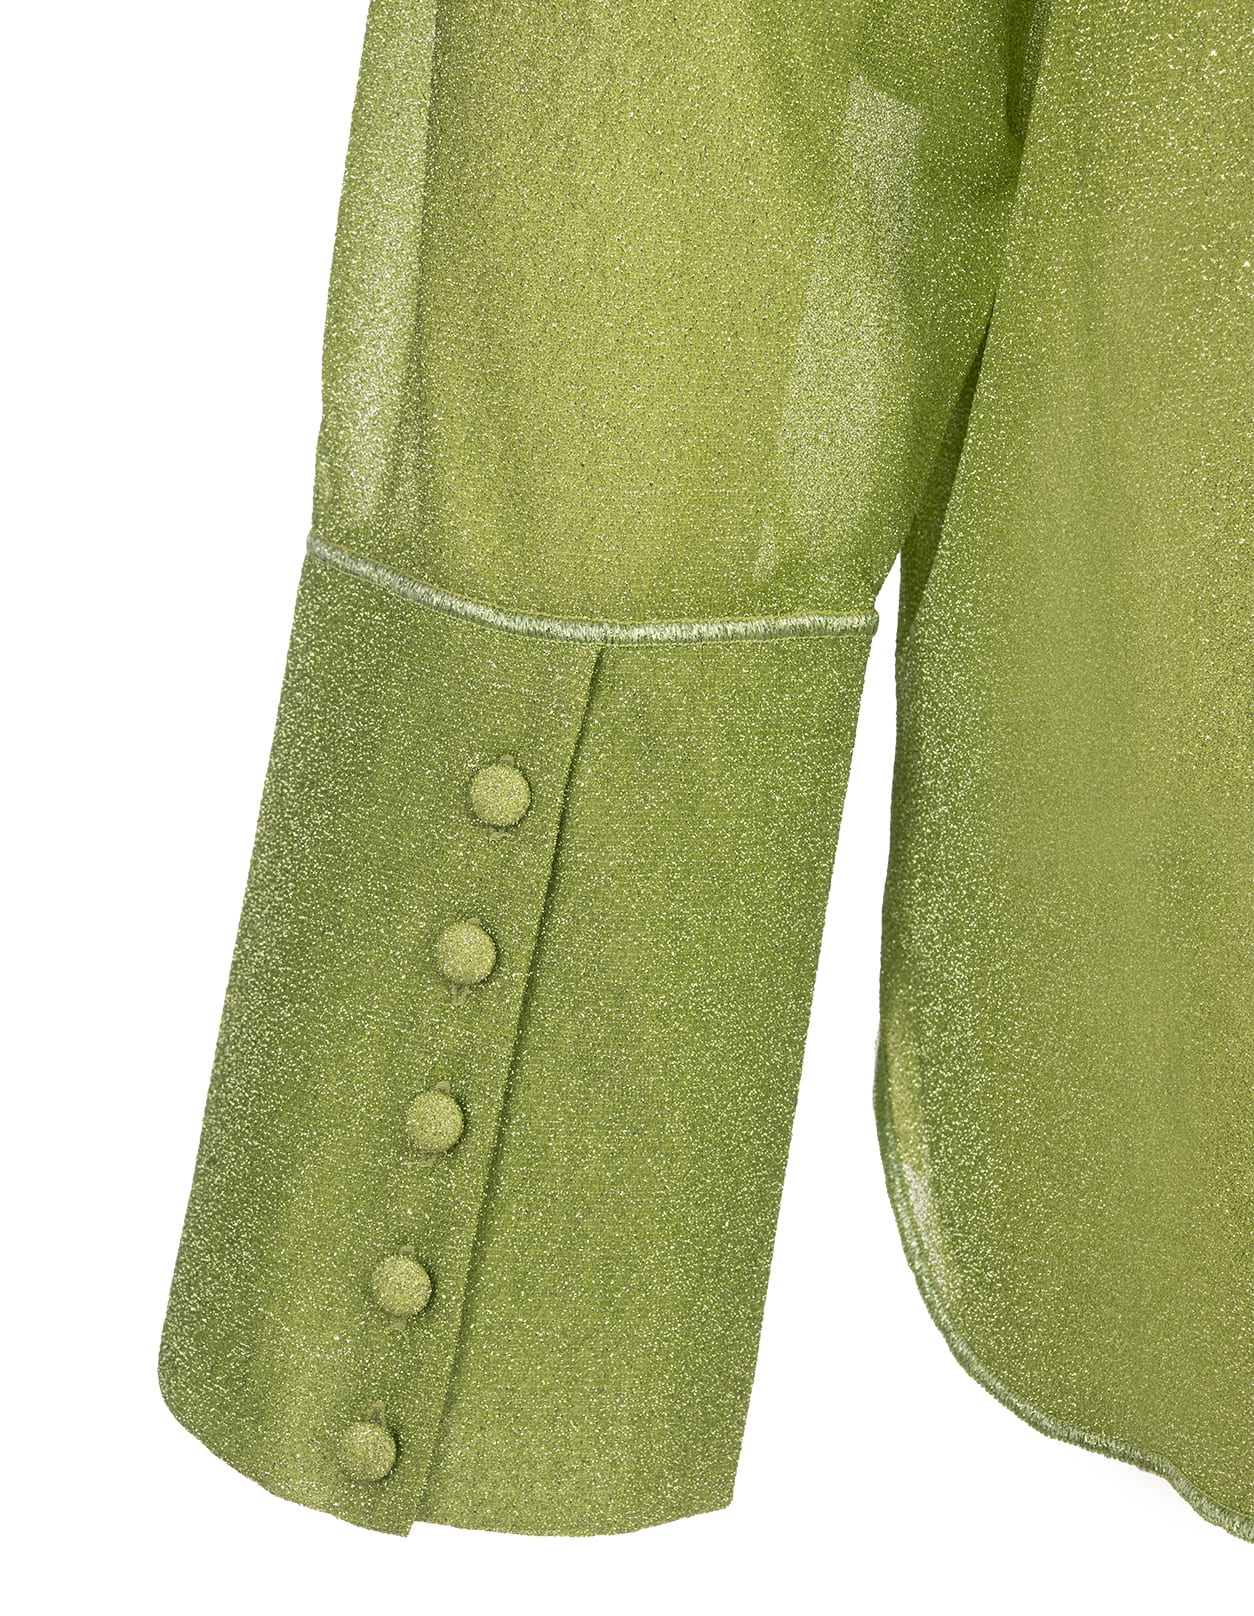 Shop Oseree Lime Lumiere Shirt In Green